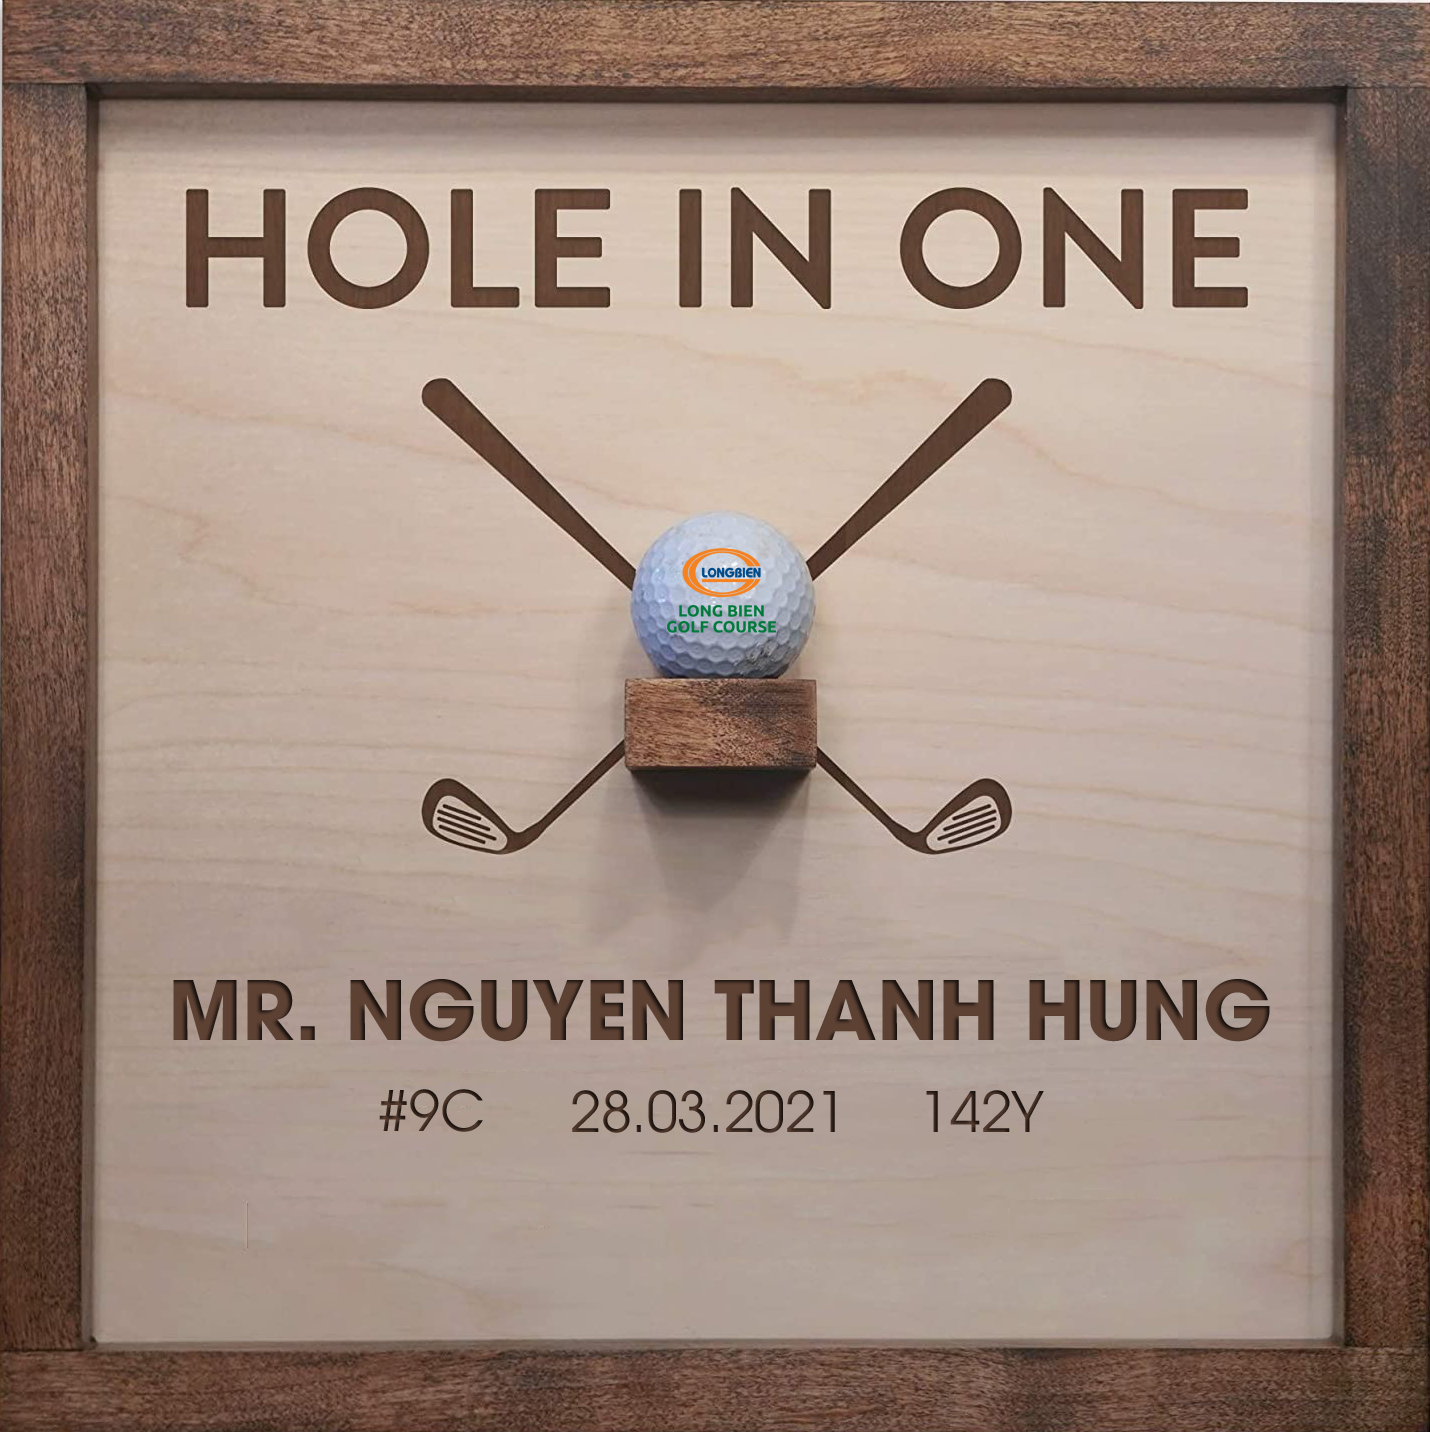 HOLE IN ONE trong night-game